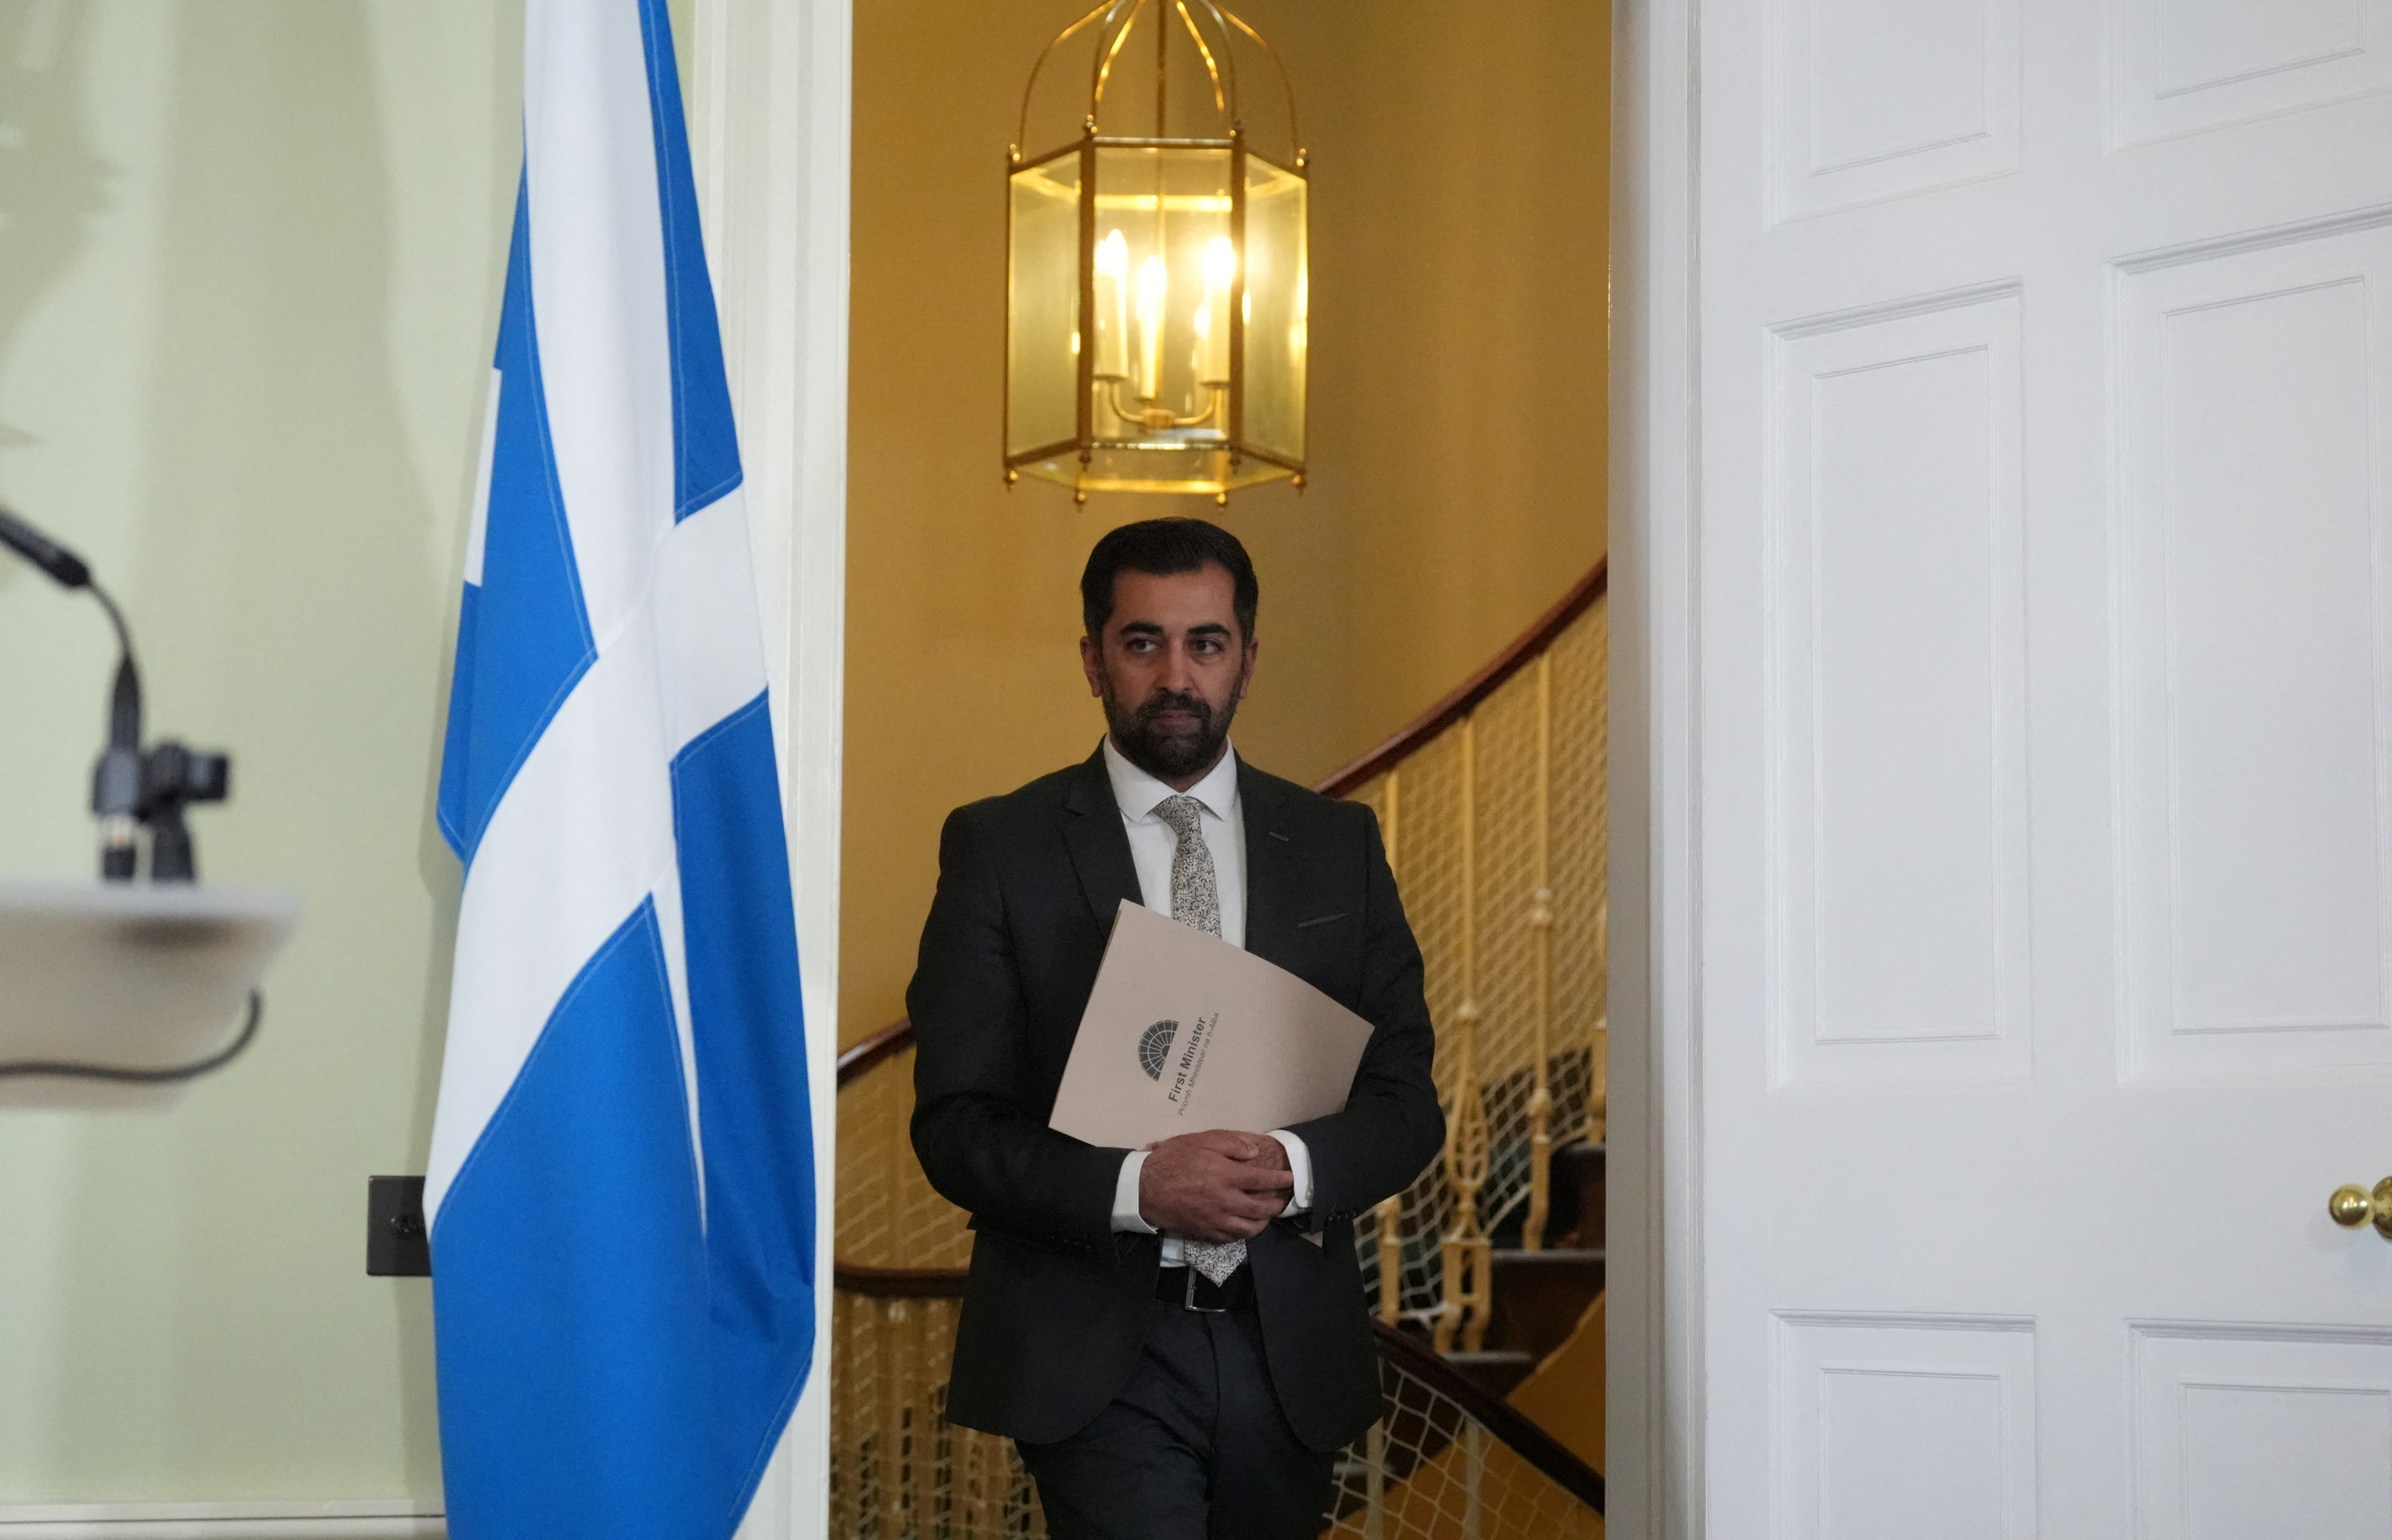 Scotland's First Minister Humza Yousaf speaks during a press conference at Bute House